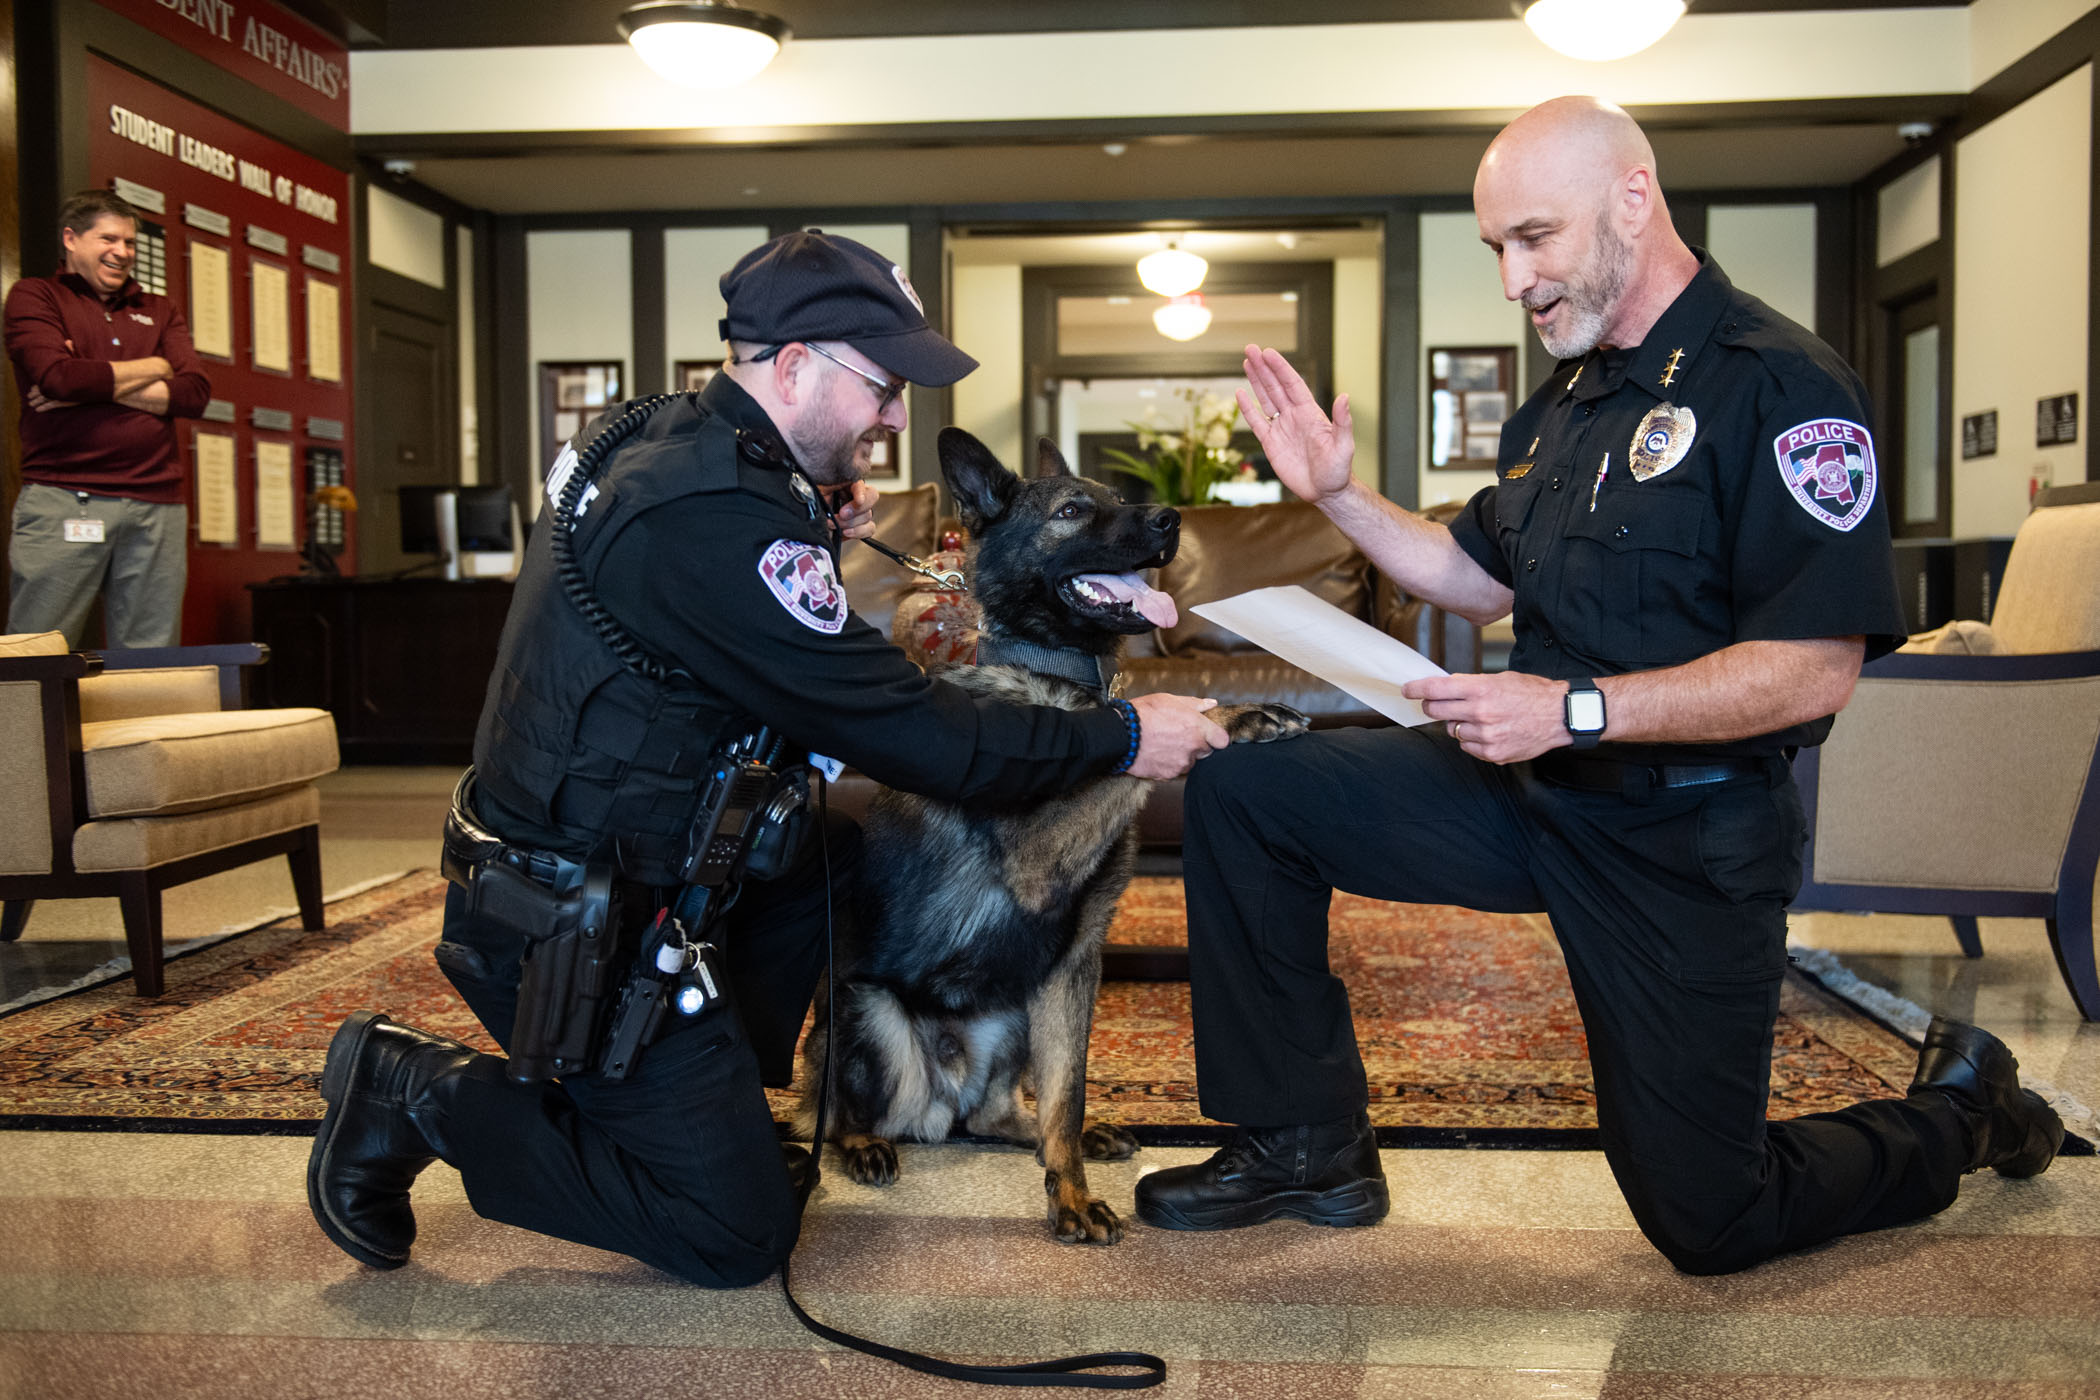 K9 Bash was welcomed and celebrated this weekend as the newest member of the ֱ Police Department. Trained in Arkansas for his work with his handler, ֱPD Officer Bradley Frost, left, Bash was sworn in by Assistant Police Chief Brian Locke, as the newest squad member.